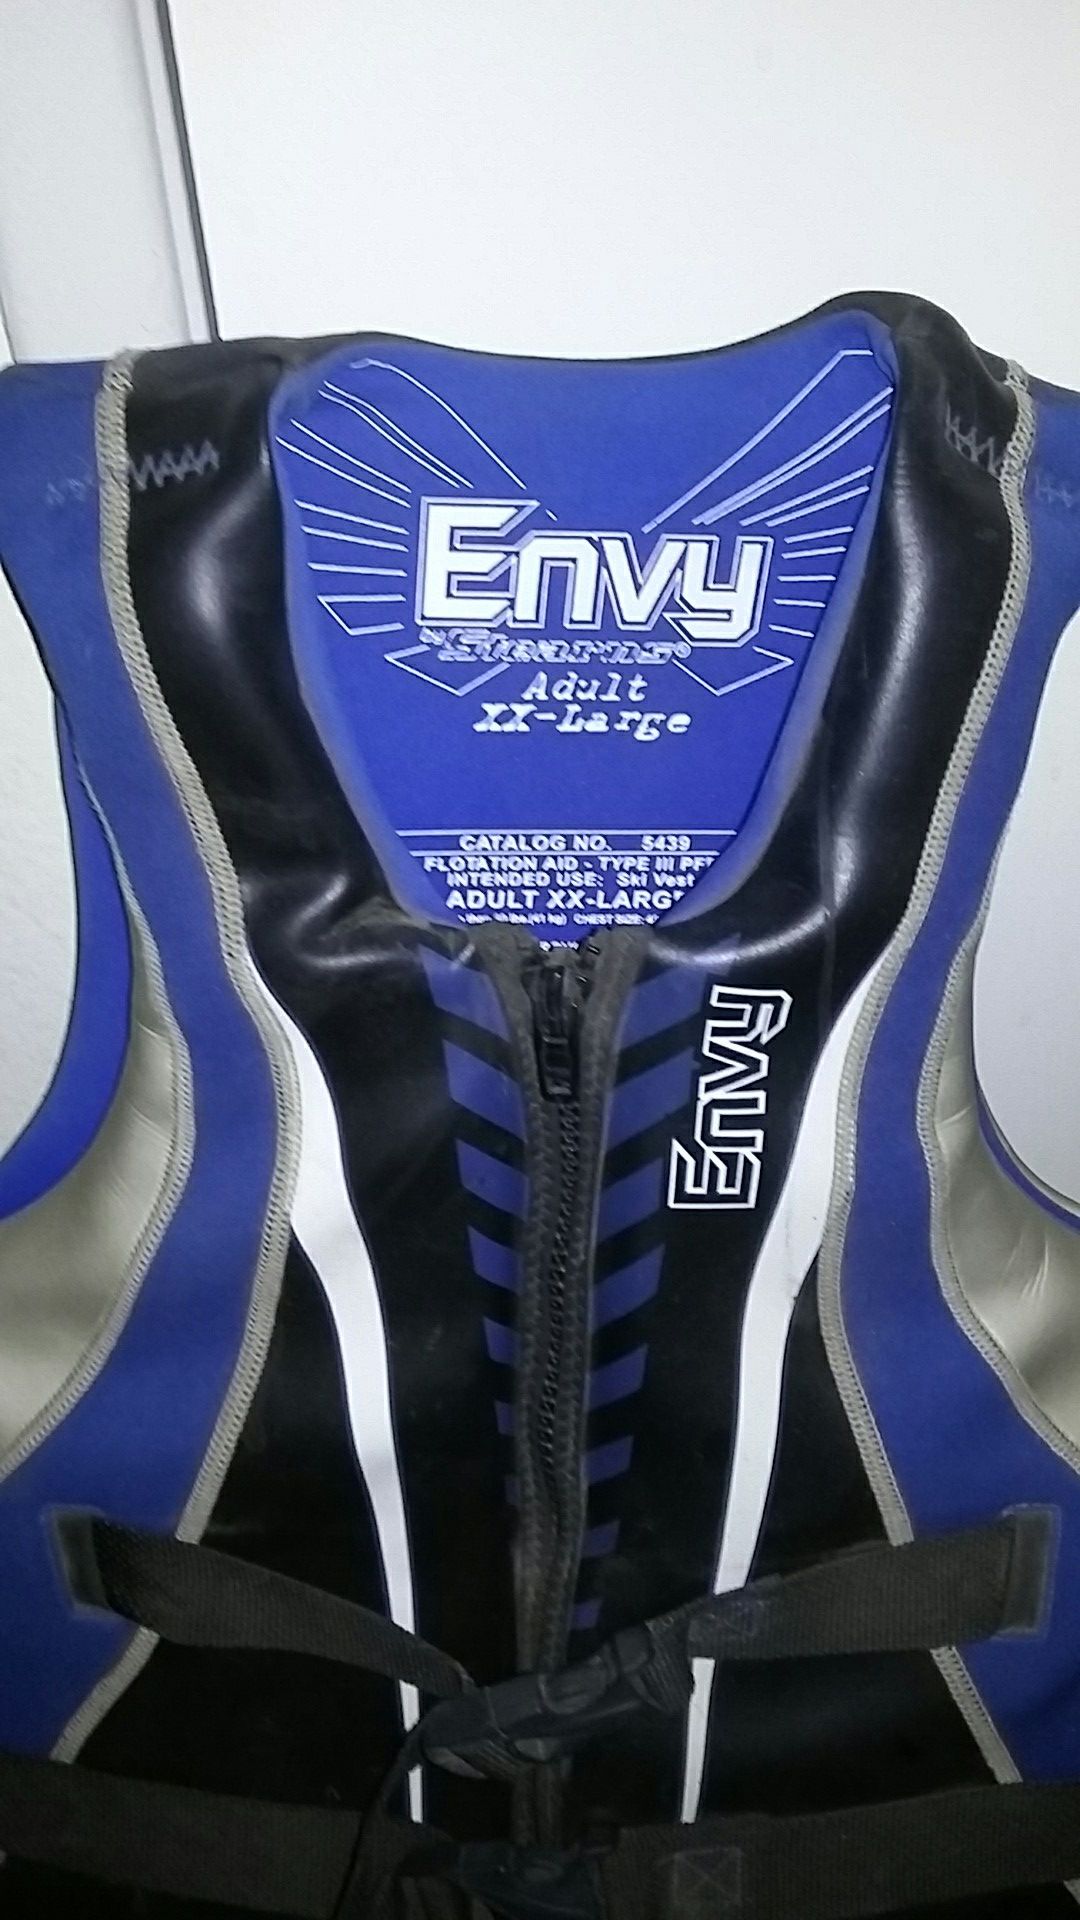 Jet Ski vest! New! Envy Adult Size XXL Nice condition! Also 2 new ones listed! Airhead 4XL $40 & Stearns 2XL $40 ($100 take all 3!) Make offer!